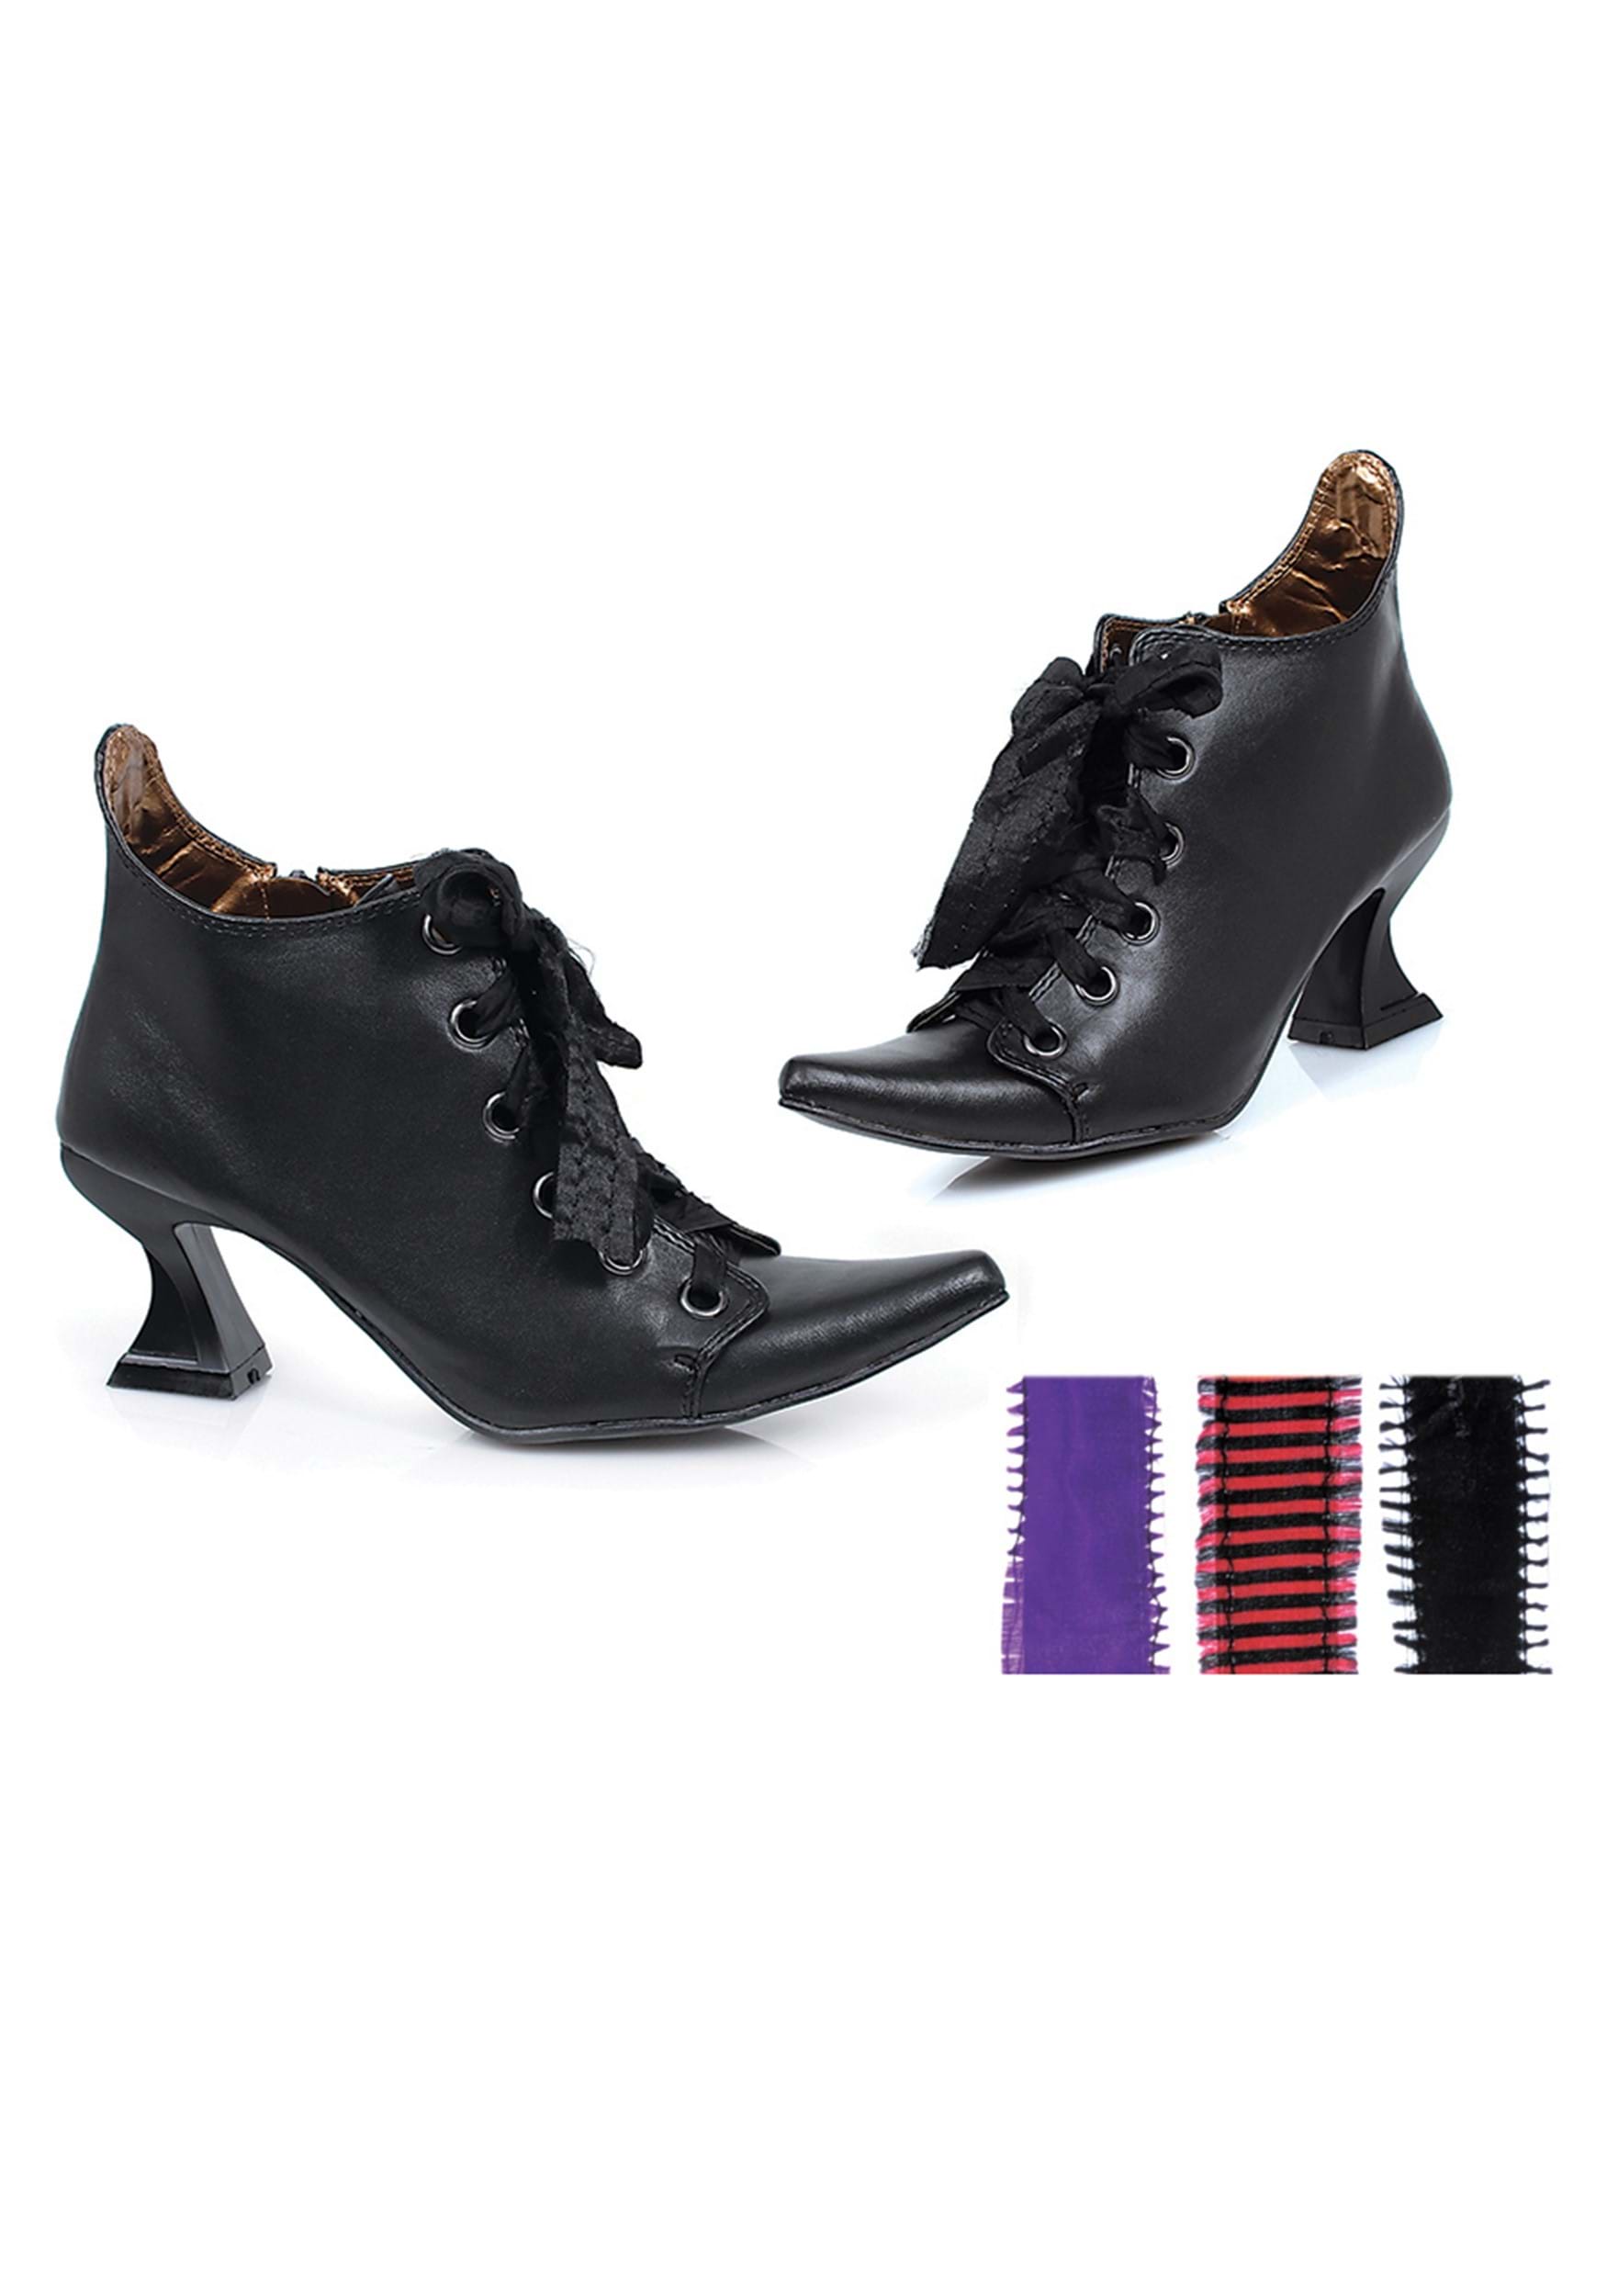 Lace Up Witch Shoes For Women